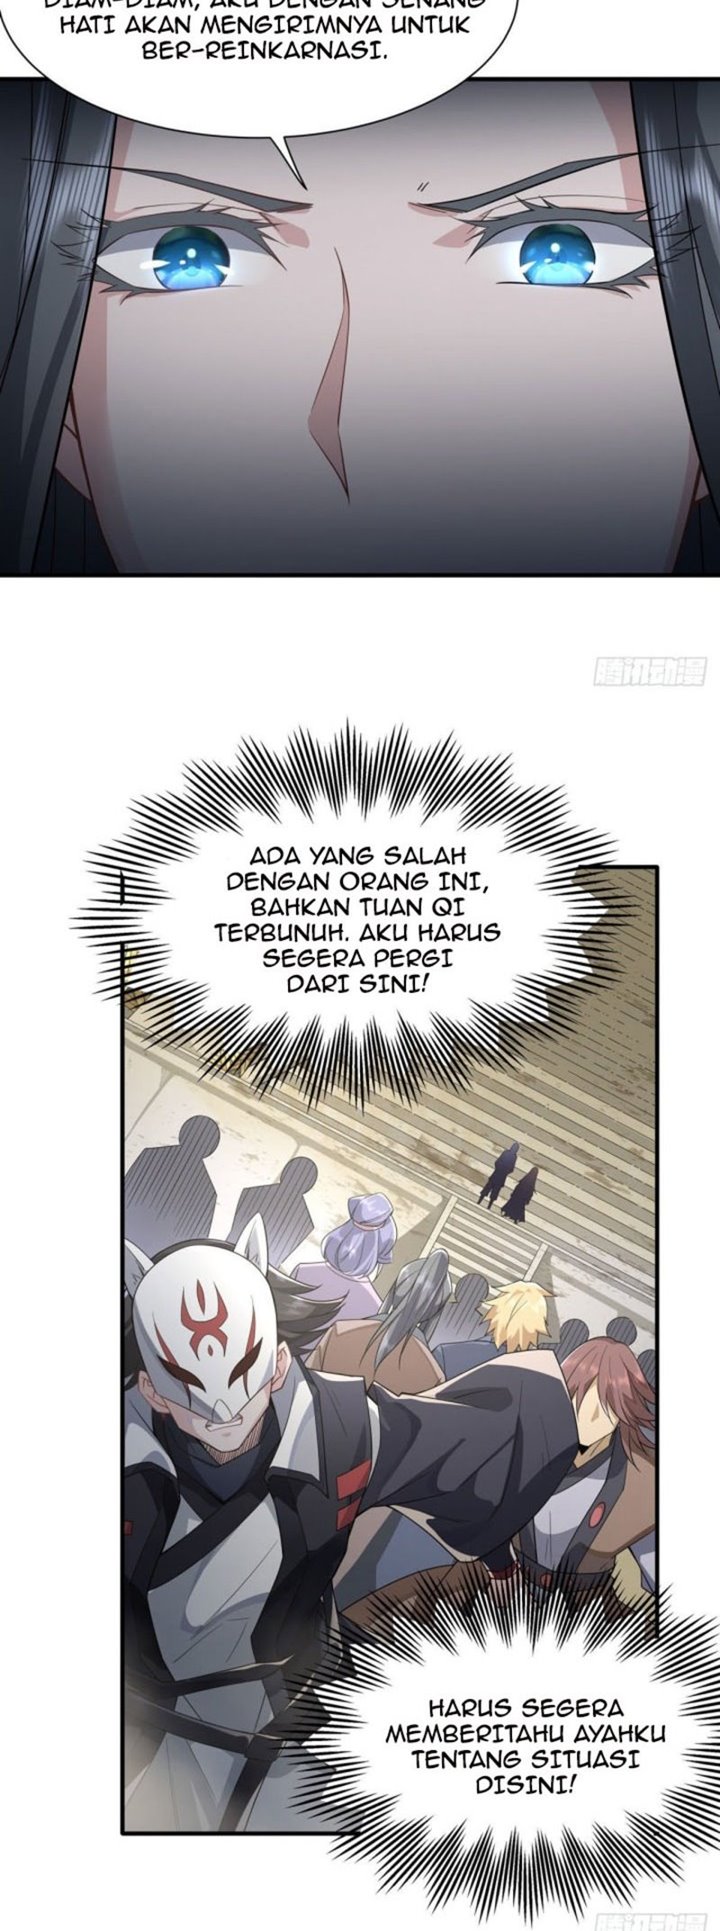 Dilarang COPAS - situs resmi www.mangacanblog.com - Komik my female apprentices are all big shots from the future 015 - chapter 15 16 Indonesia my female apprentices are all big shots from the future 015 - chapter 15 Terbaru 22|Baca Manga Komik Indonesia|Mangacan